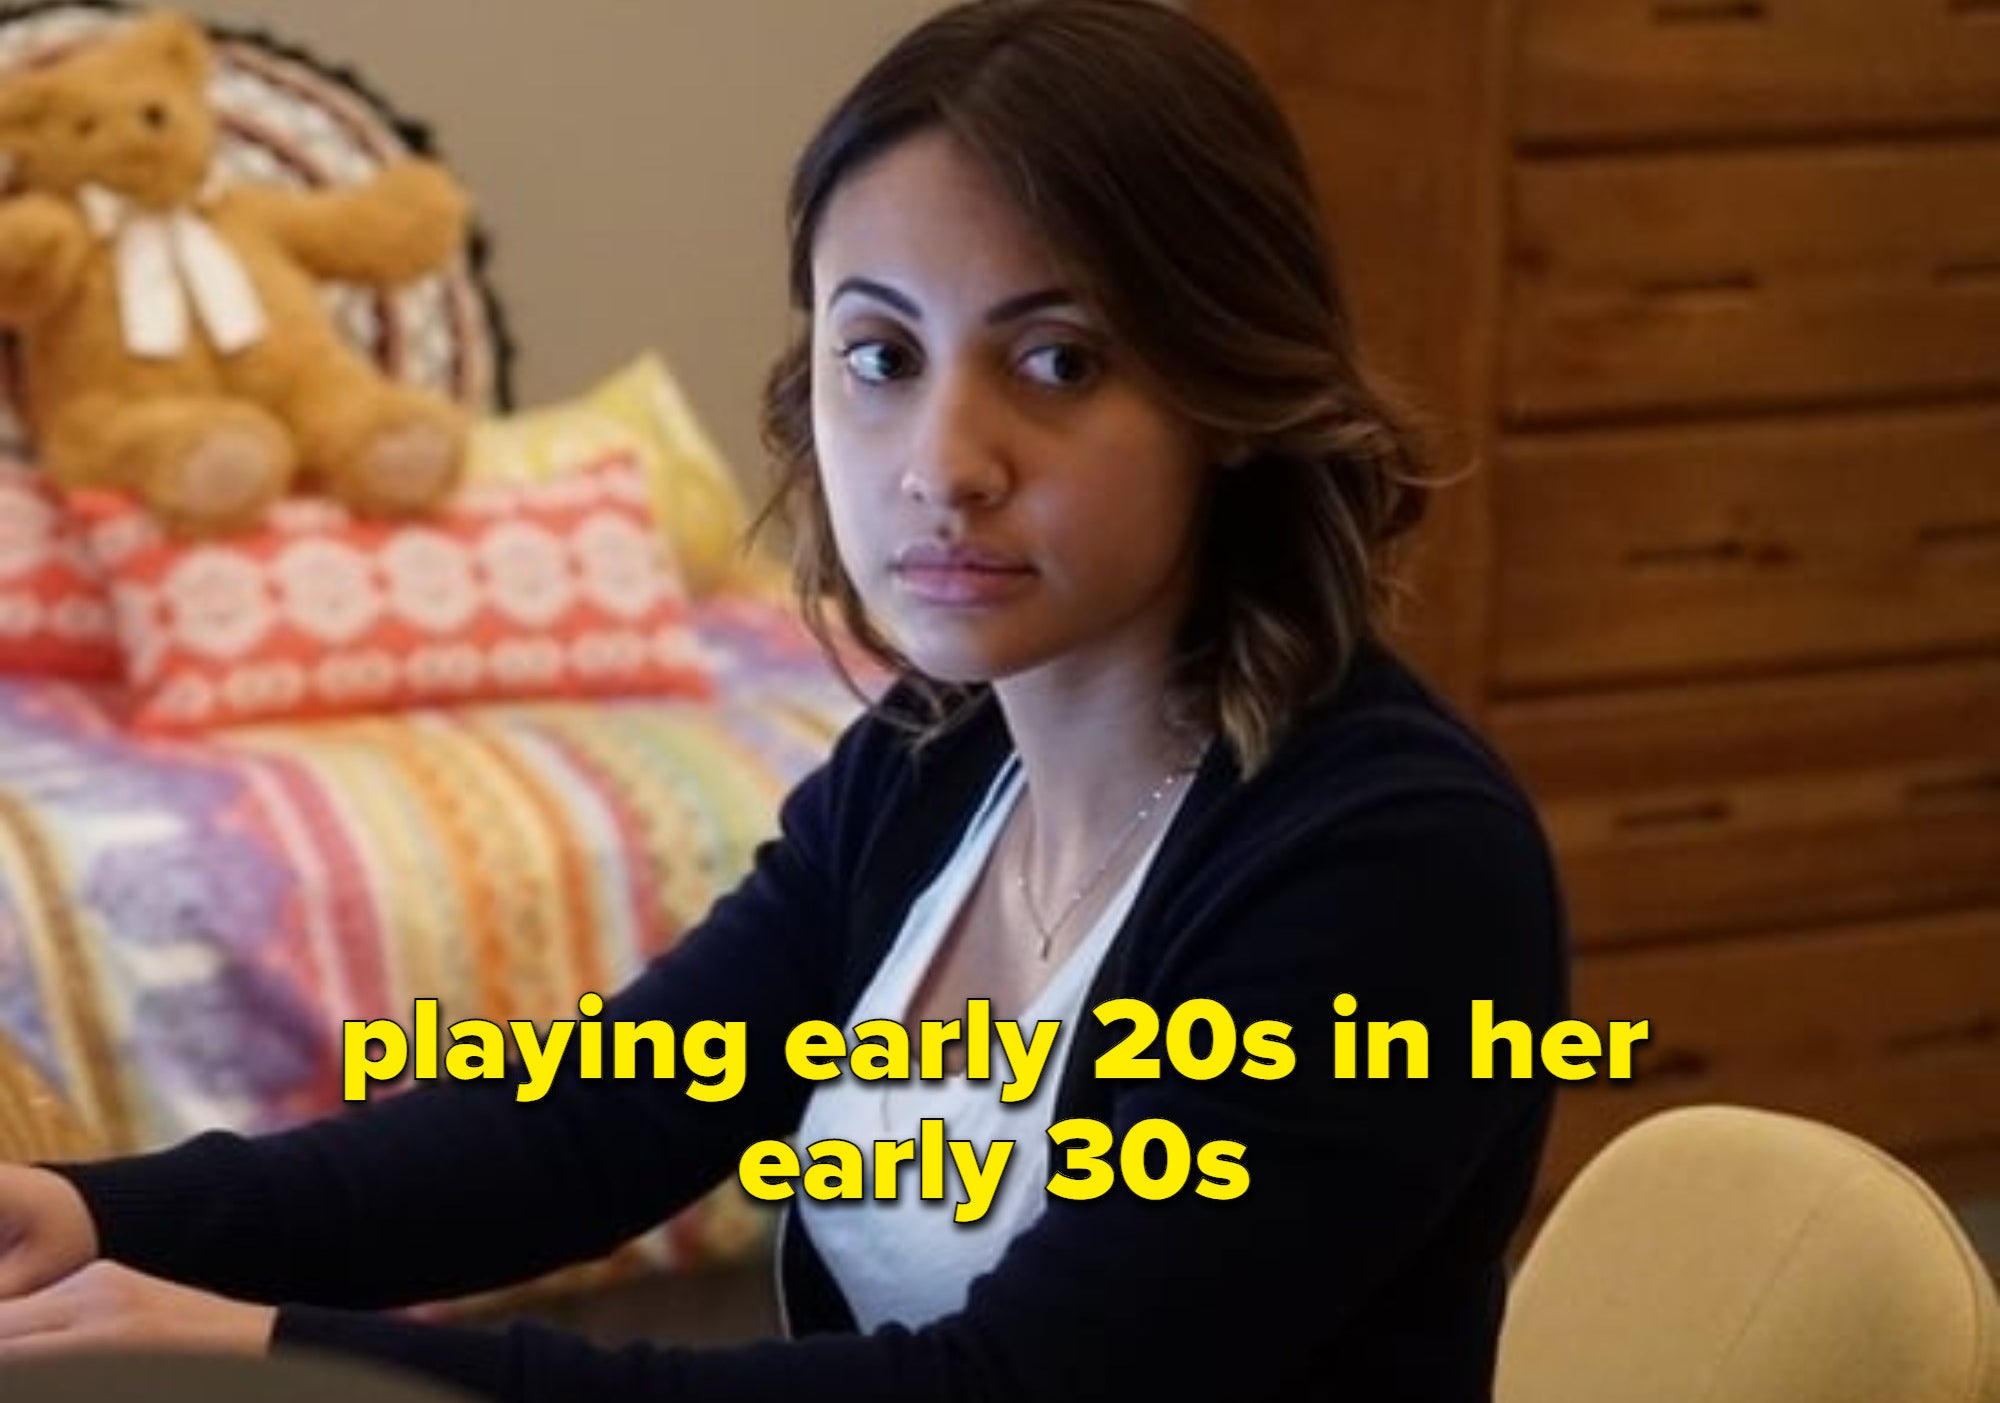 Francia Raisa, in her early 30s, is playing early 20s characters